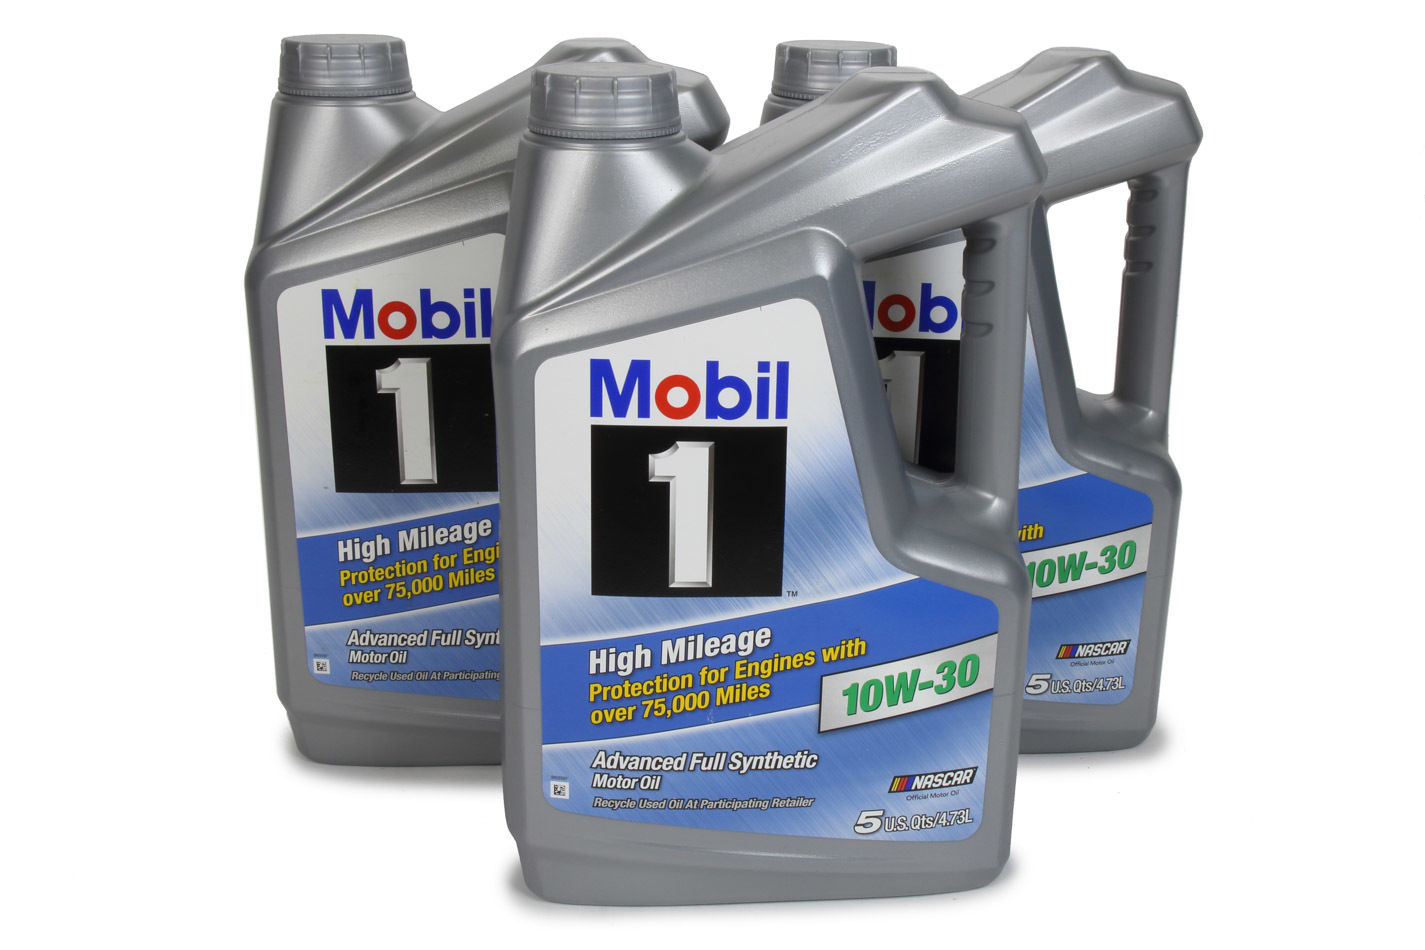 MOBIL 1 Motor Oil High Mileage 10W30 Synthetic 5 qt Jug Set of 3